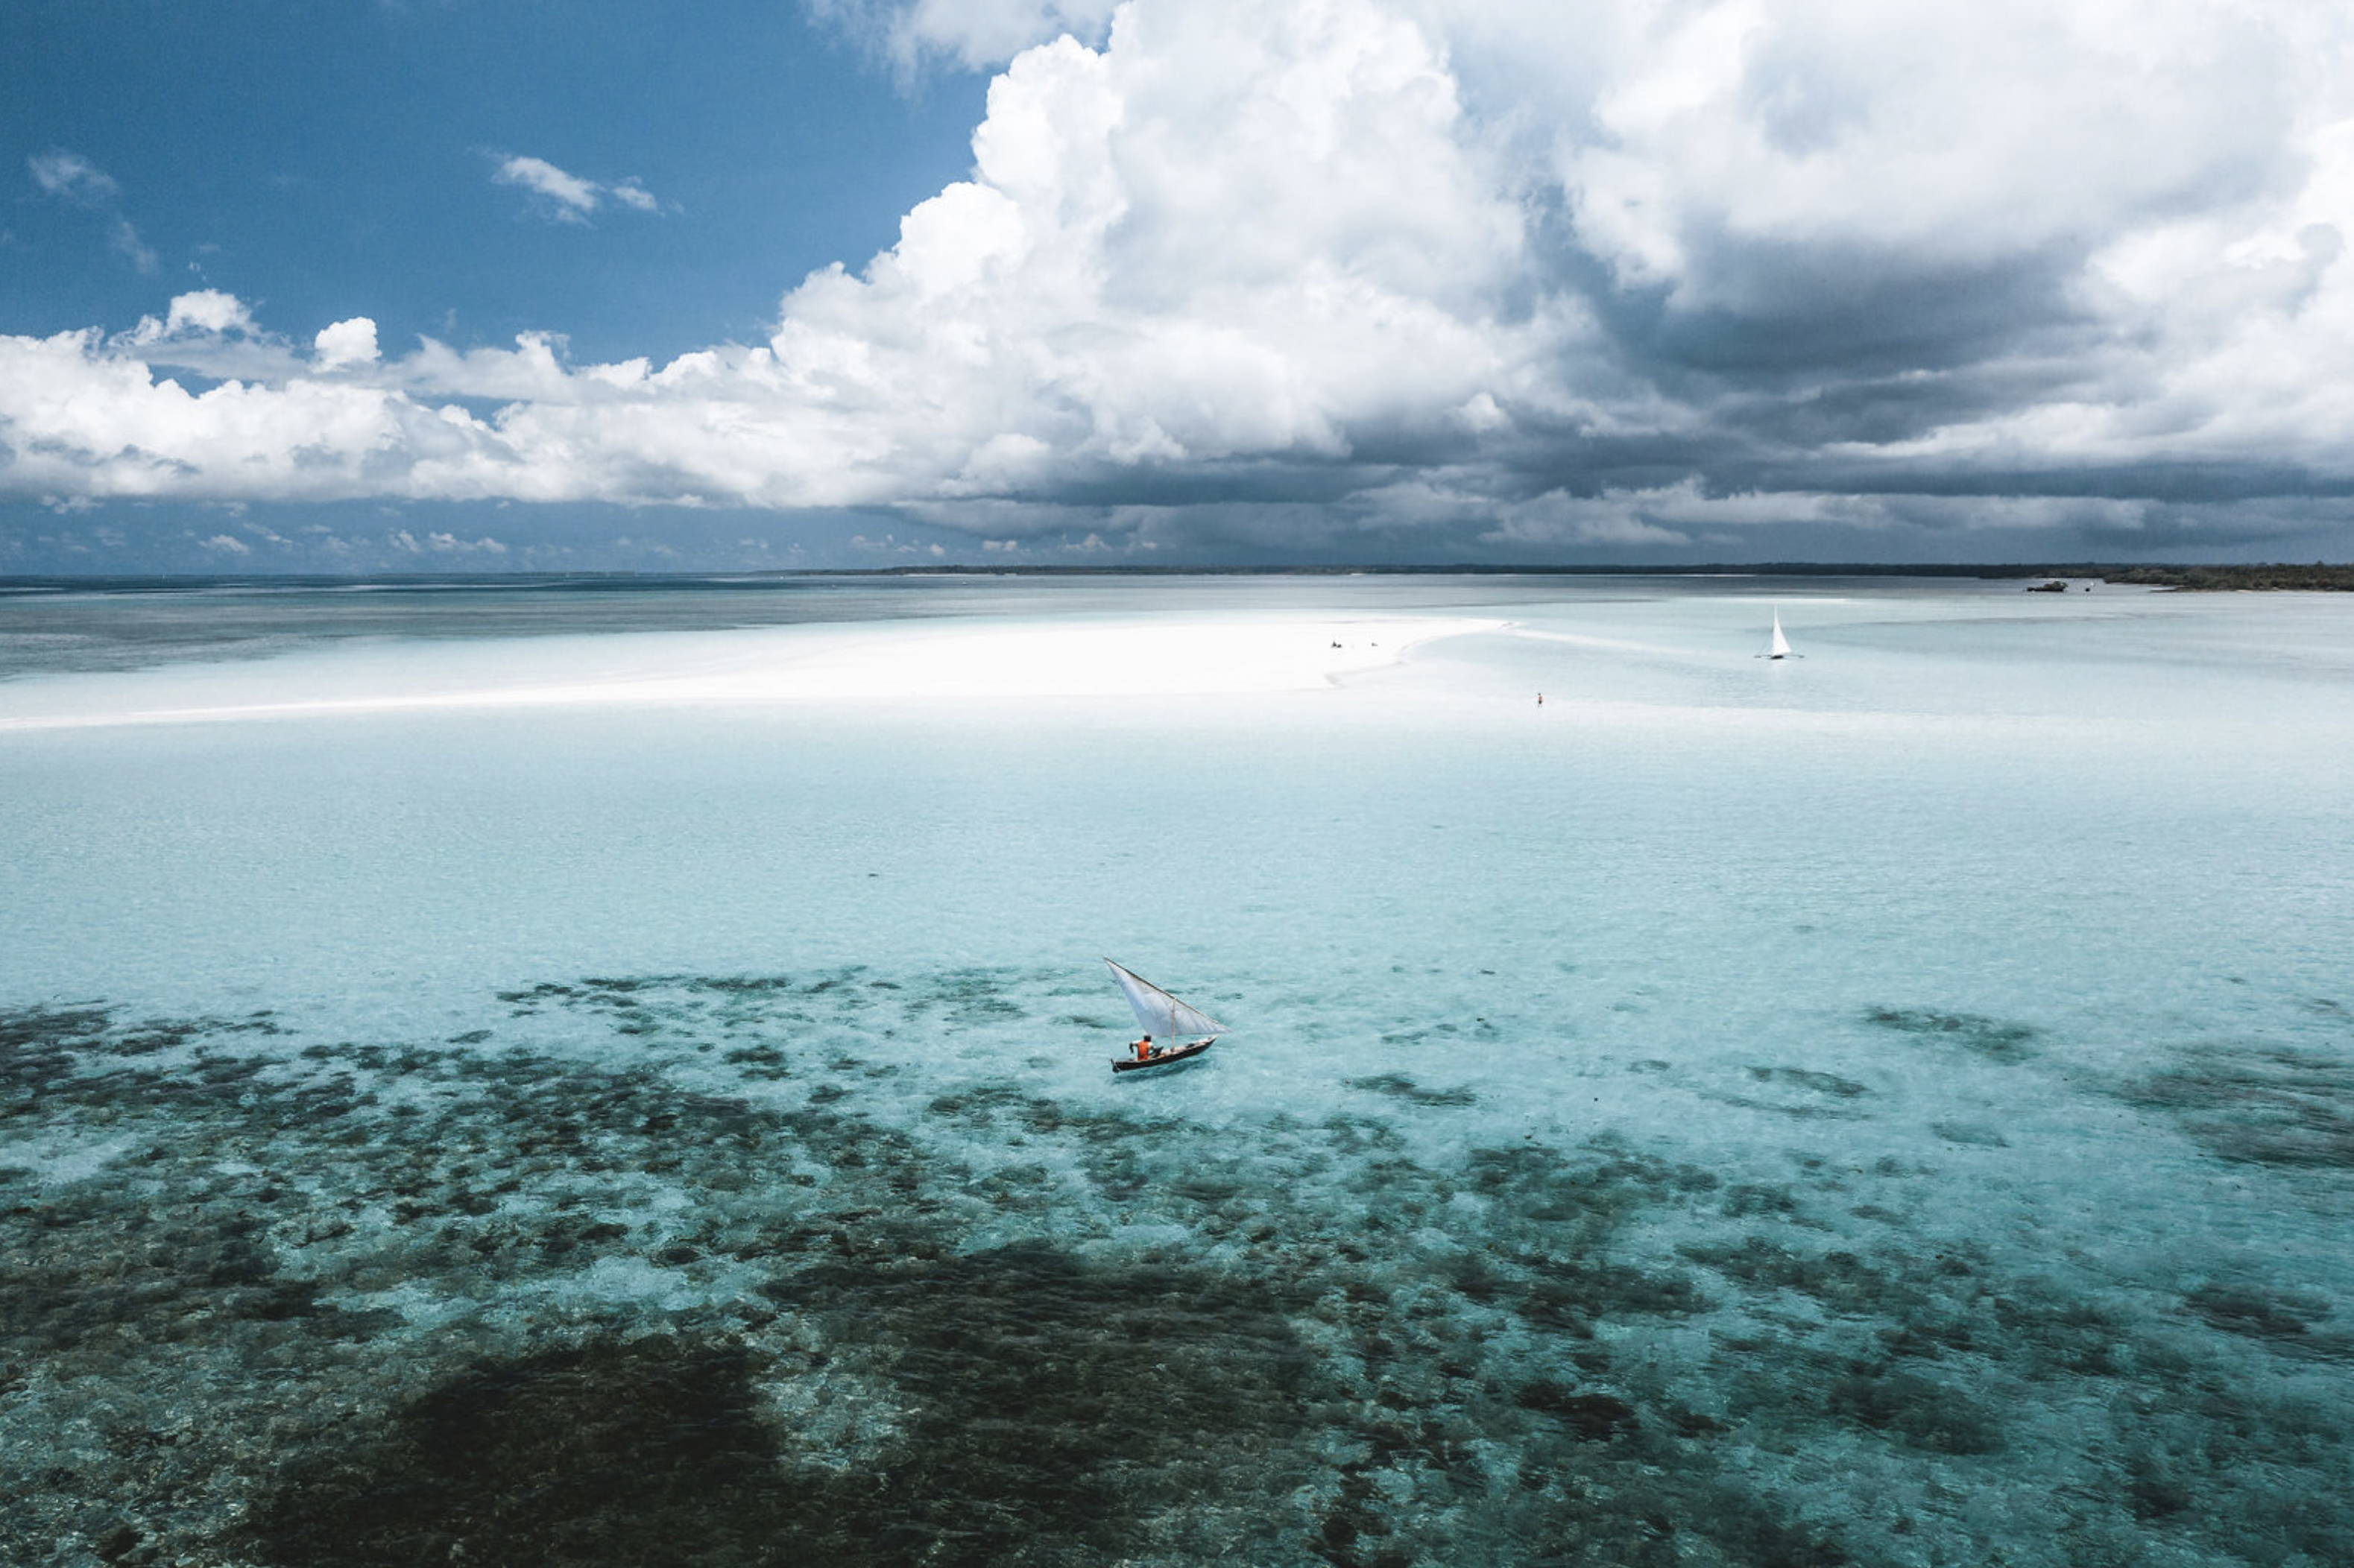 Experience romantic Tanzanian backdrops like this dhow-dotted azure water surrounding Pemba Island when you take a tailor-made holiday with Alfred&.